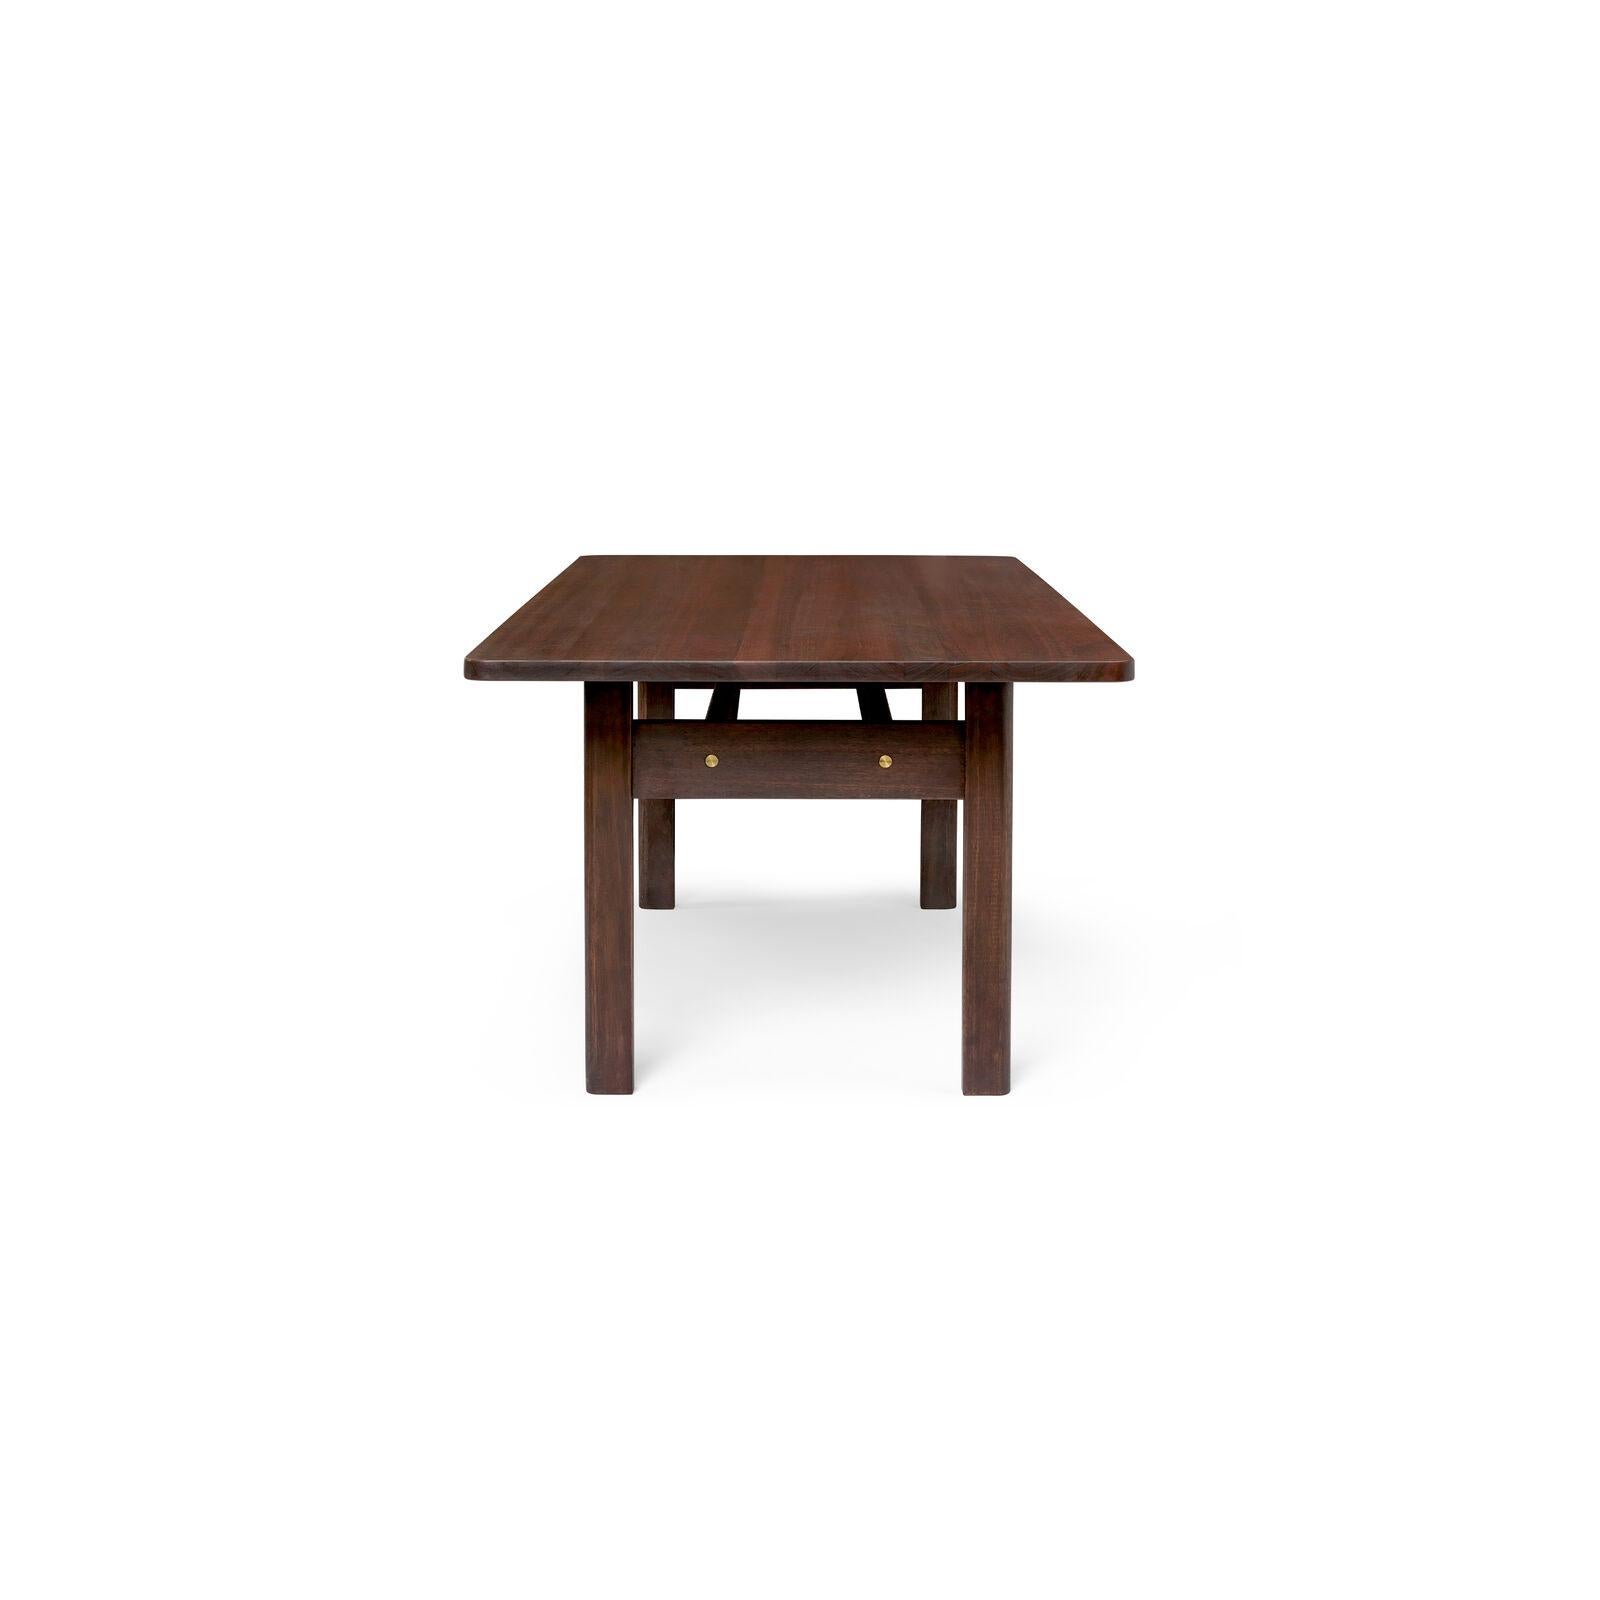 Mid-Century Modern BM0698 Asserbo Dining Table in Dark Oil Stained Eucalyptus Wood *Quickship* For Sale